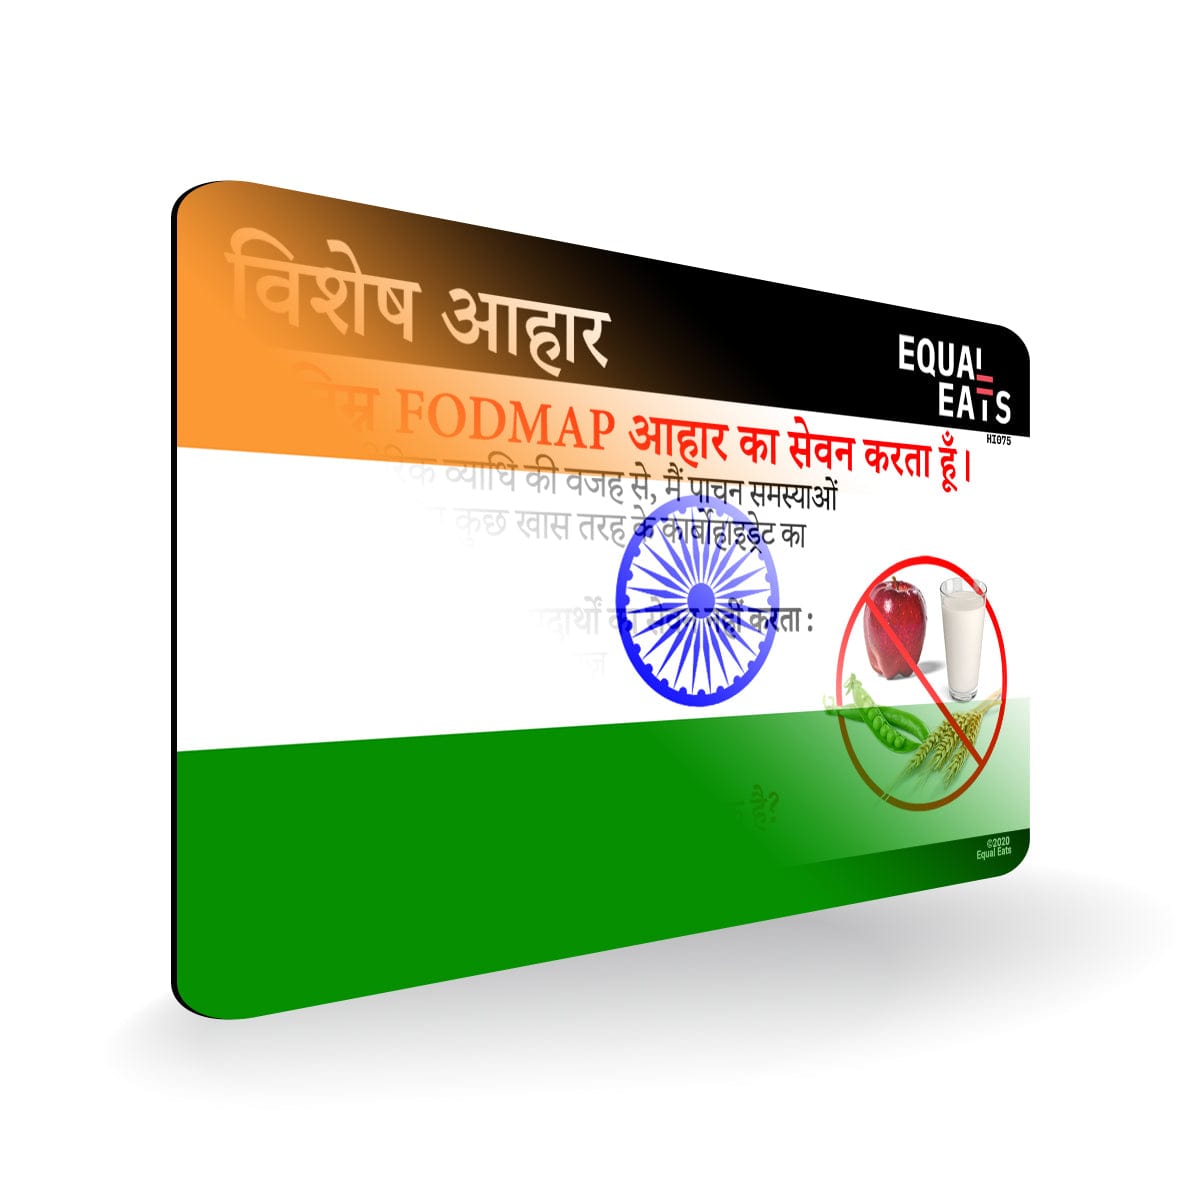 Low FODMAP Diet in Hindi. Low FODMAP Diet Card for India